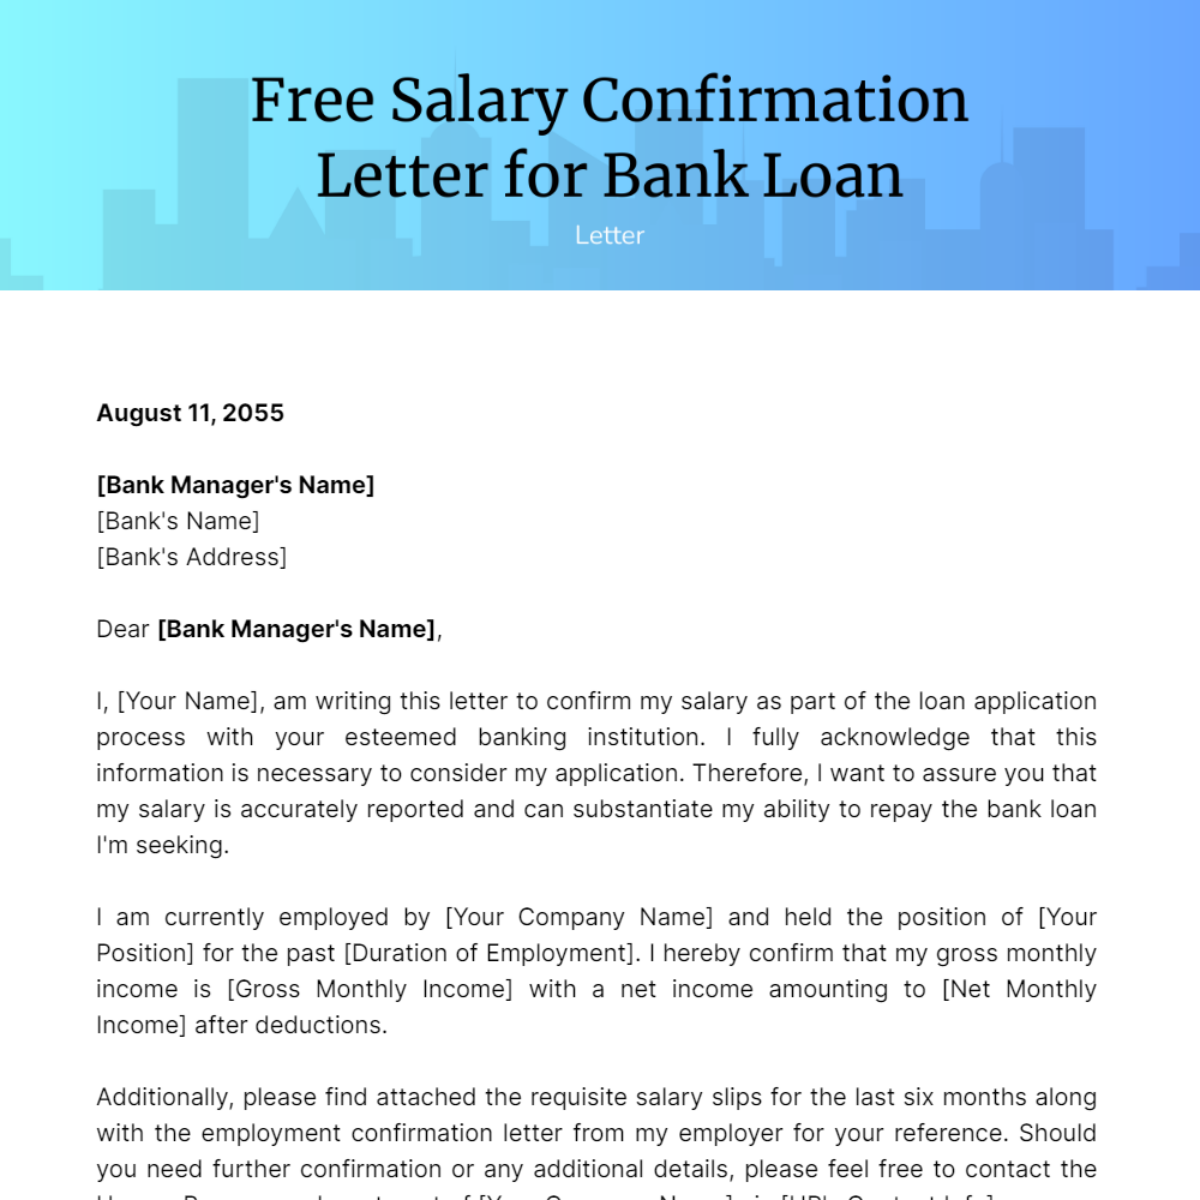 Salary Confirmation Letter for Bank Loan Template